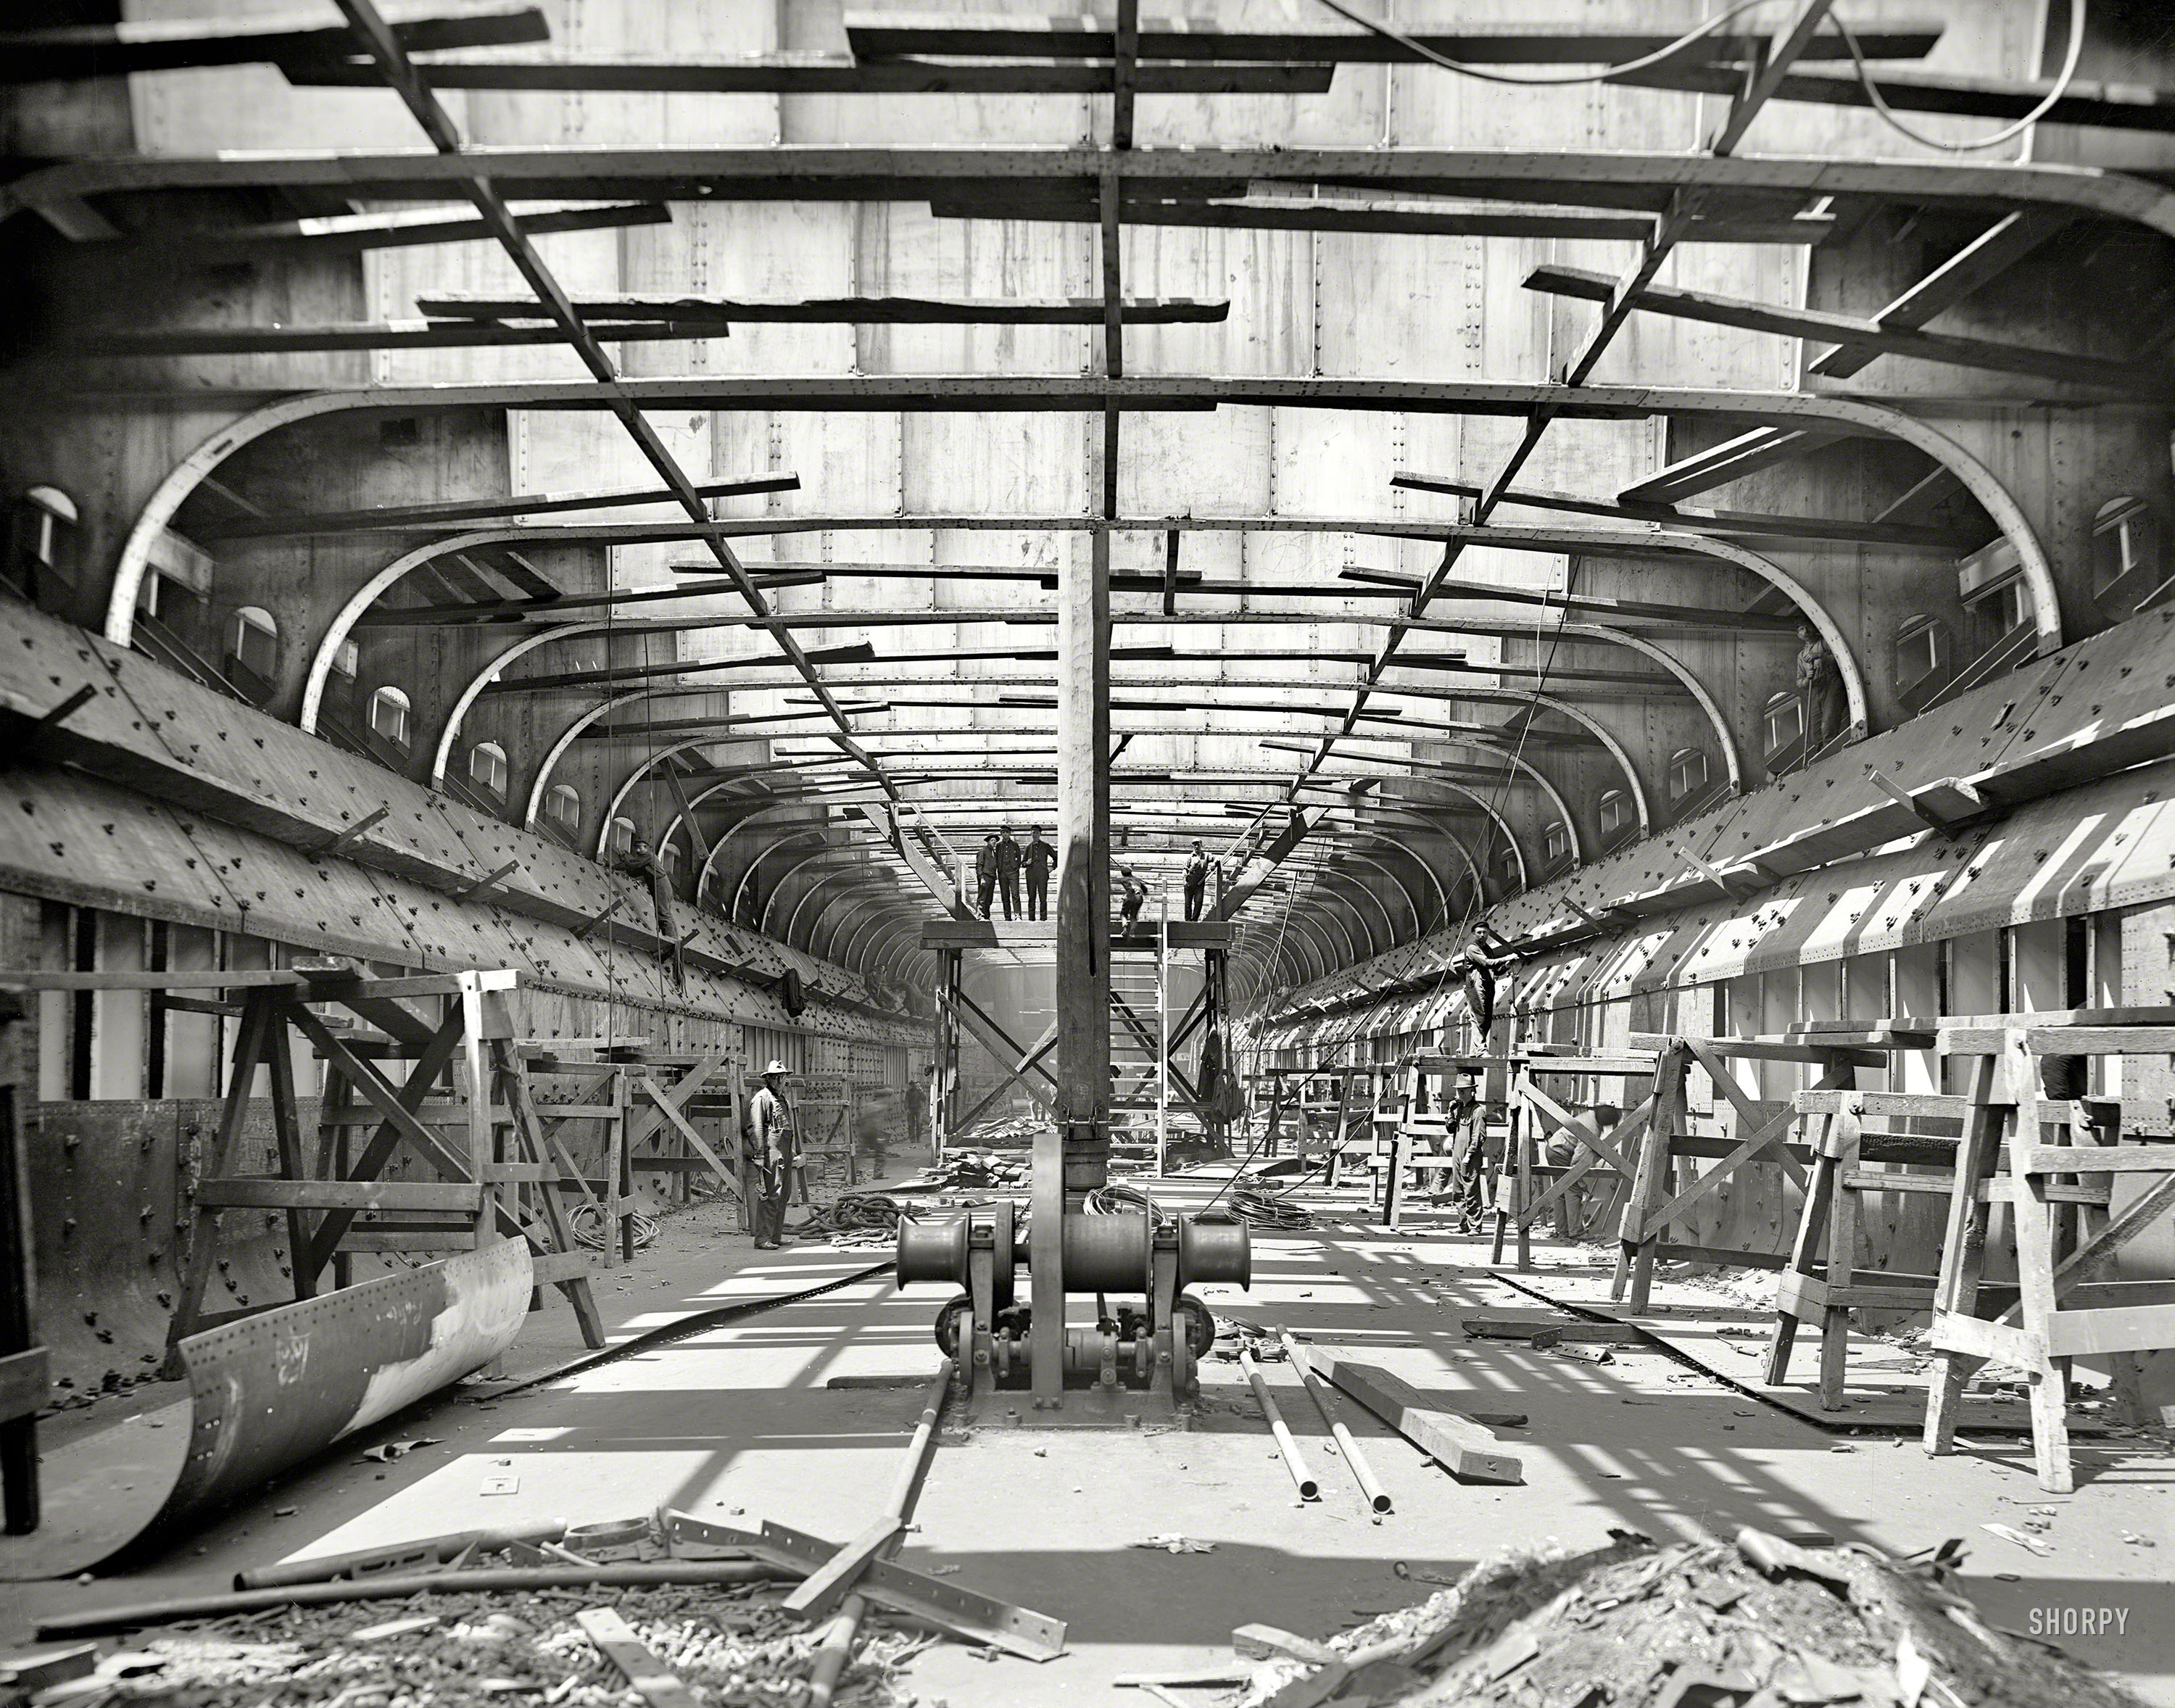 South Chicago circa 1905. "Steamer William E. Corey, interior of hold." An inside look at the bulk freighter seen earlier here. 8x10 glass negative. View full size.